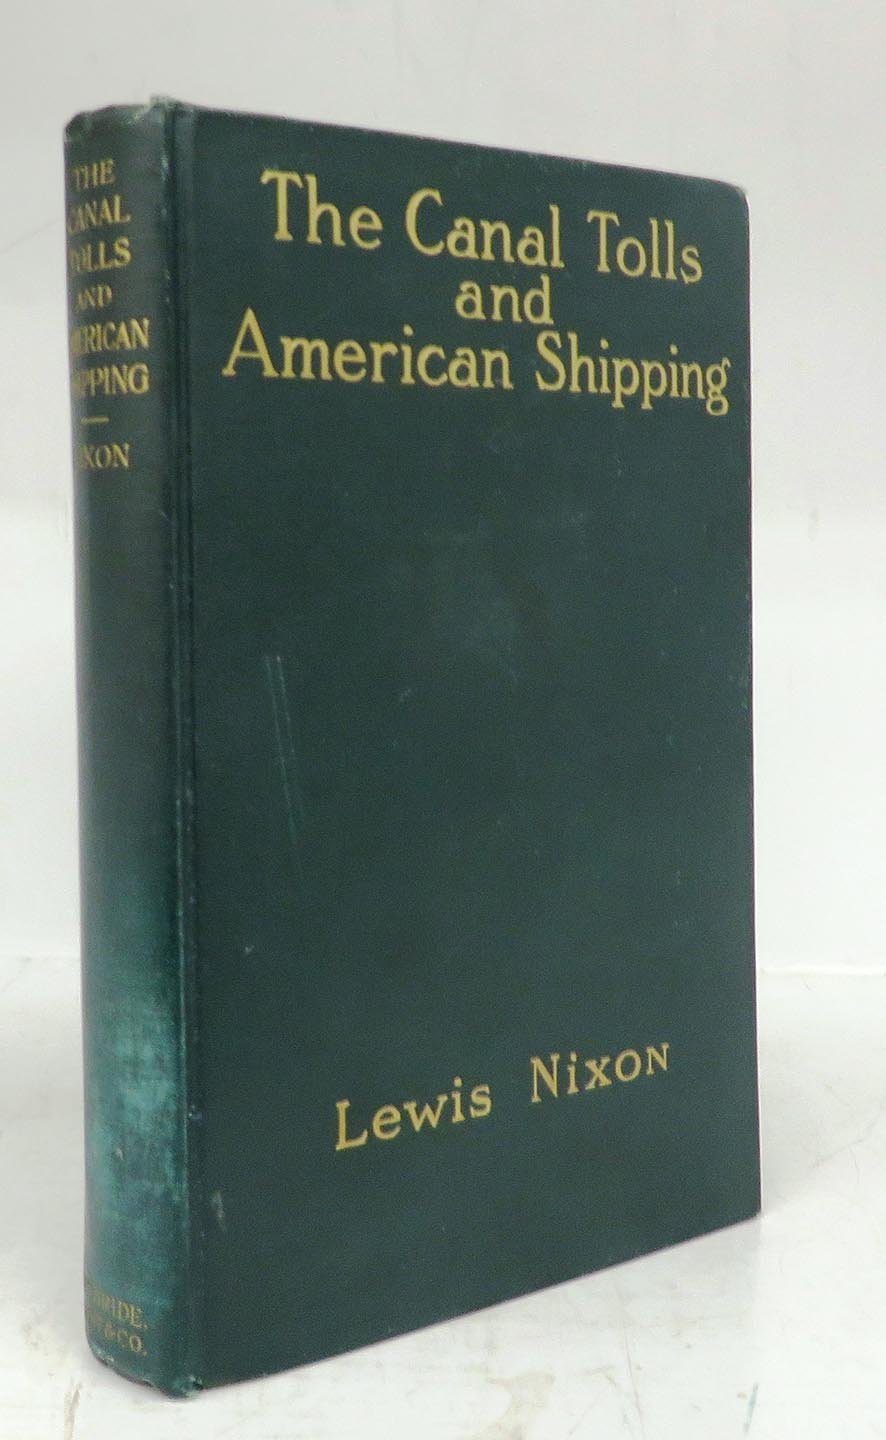 The Canal Tolls and American Shipping